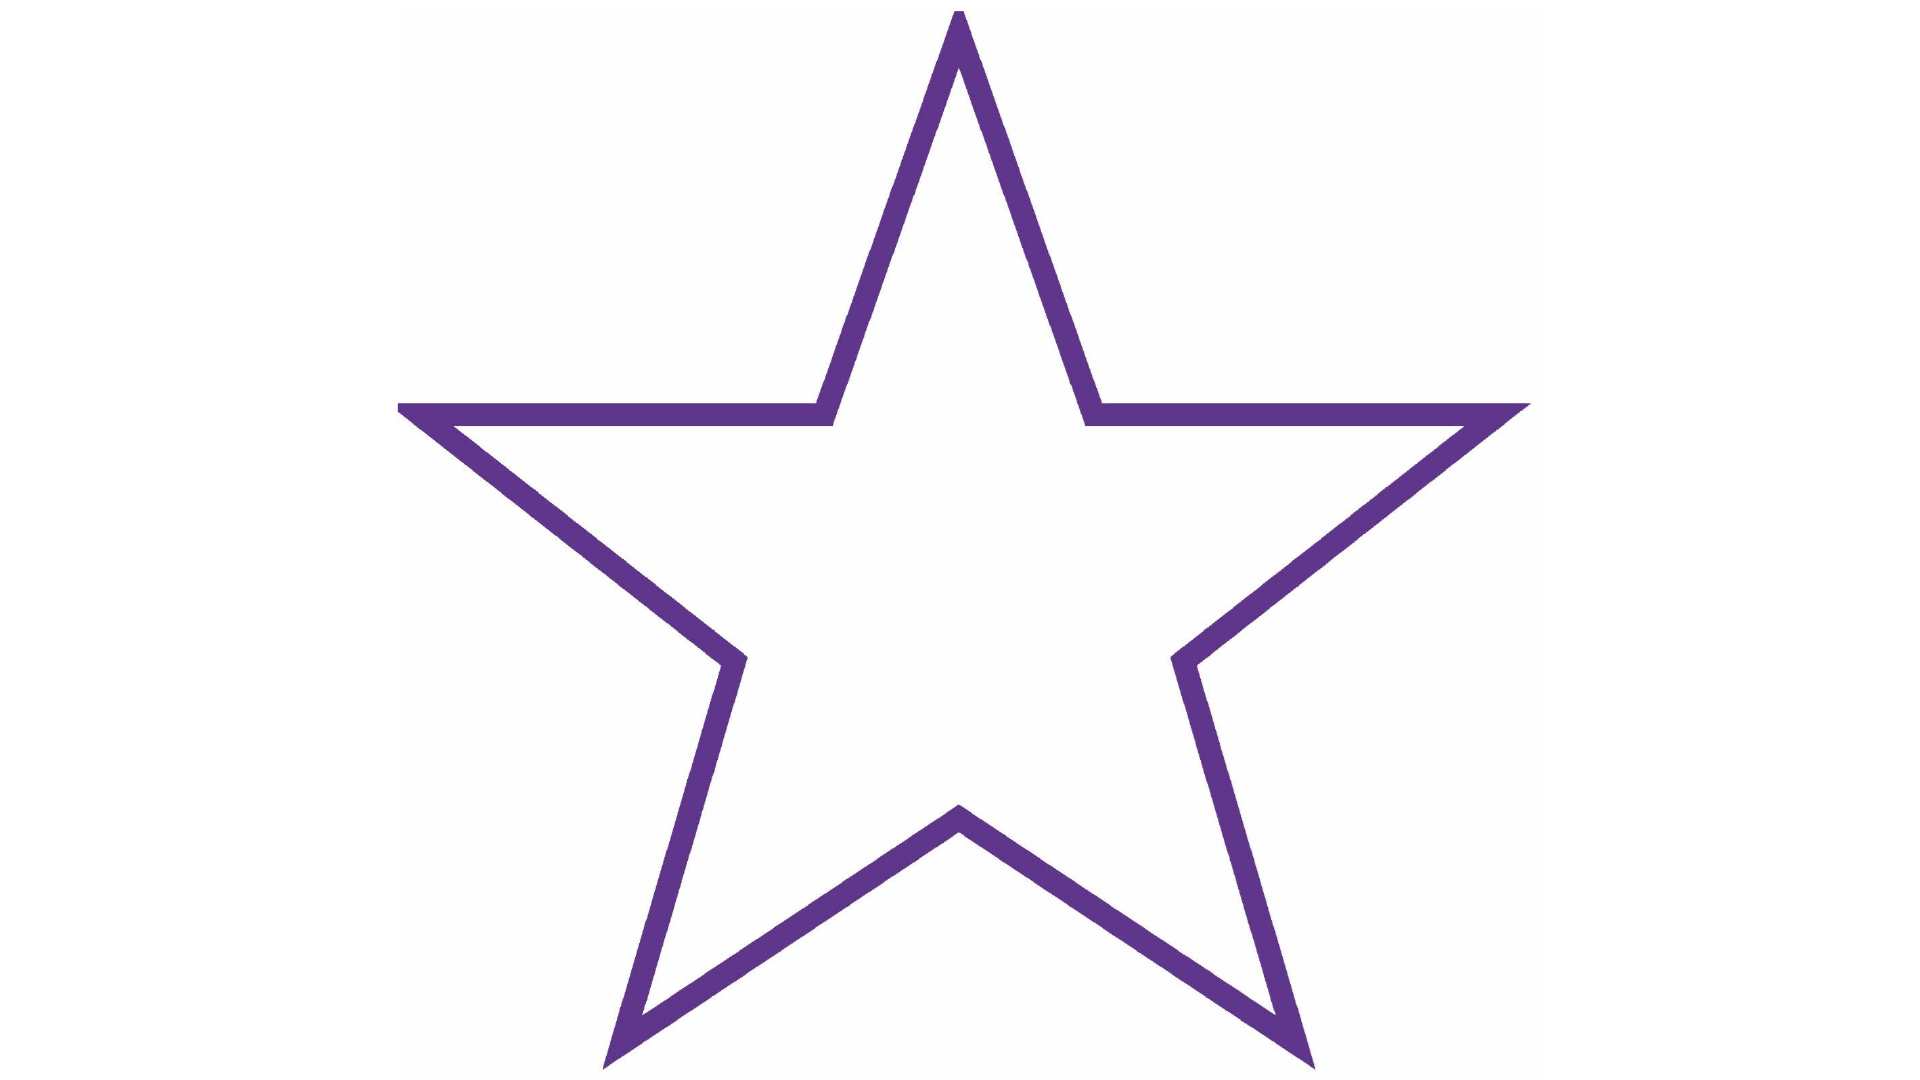 Image of a purple edged star on white background.